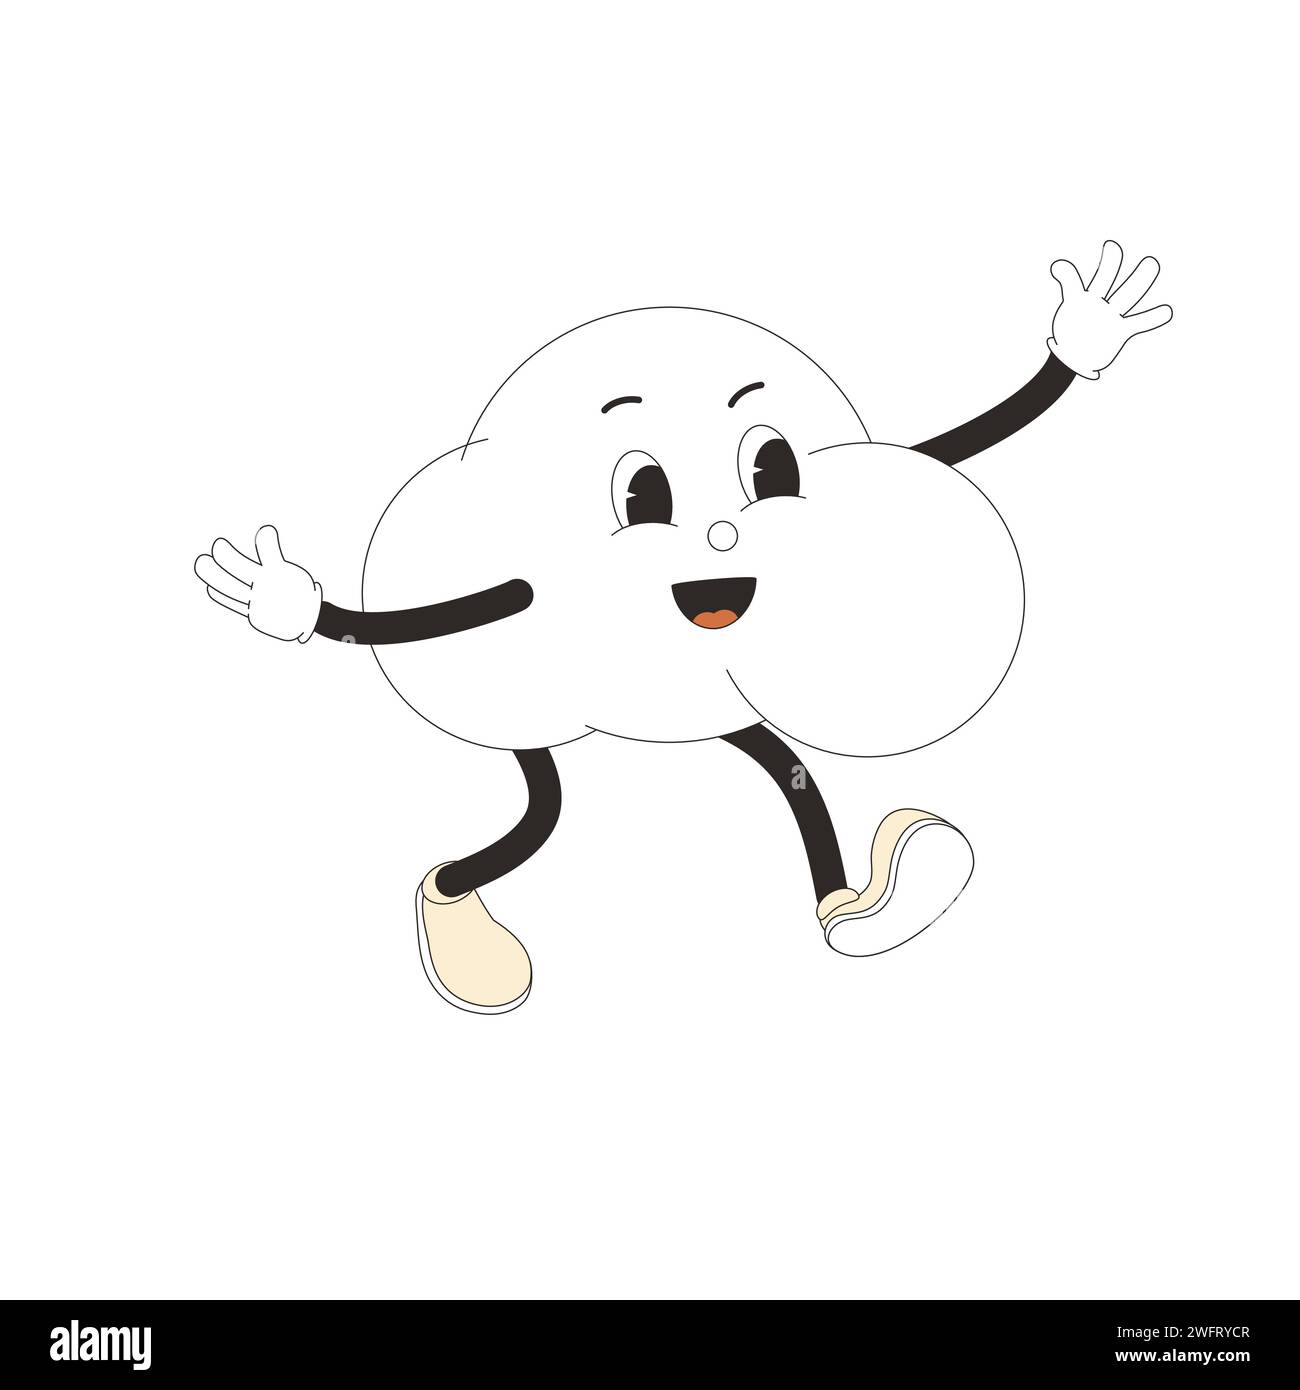 Cloud in retro mascot style. Cute character flying or running isolated on white background. Vector illustration. Stock Vector